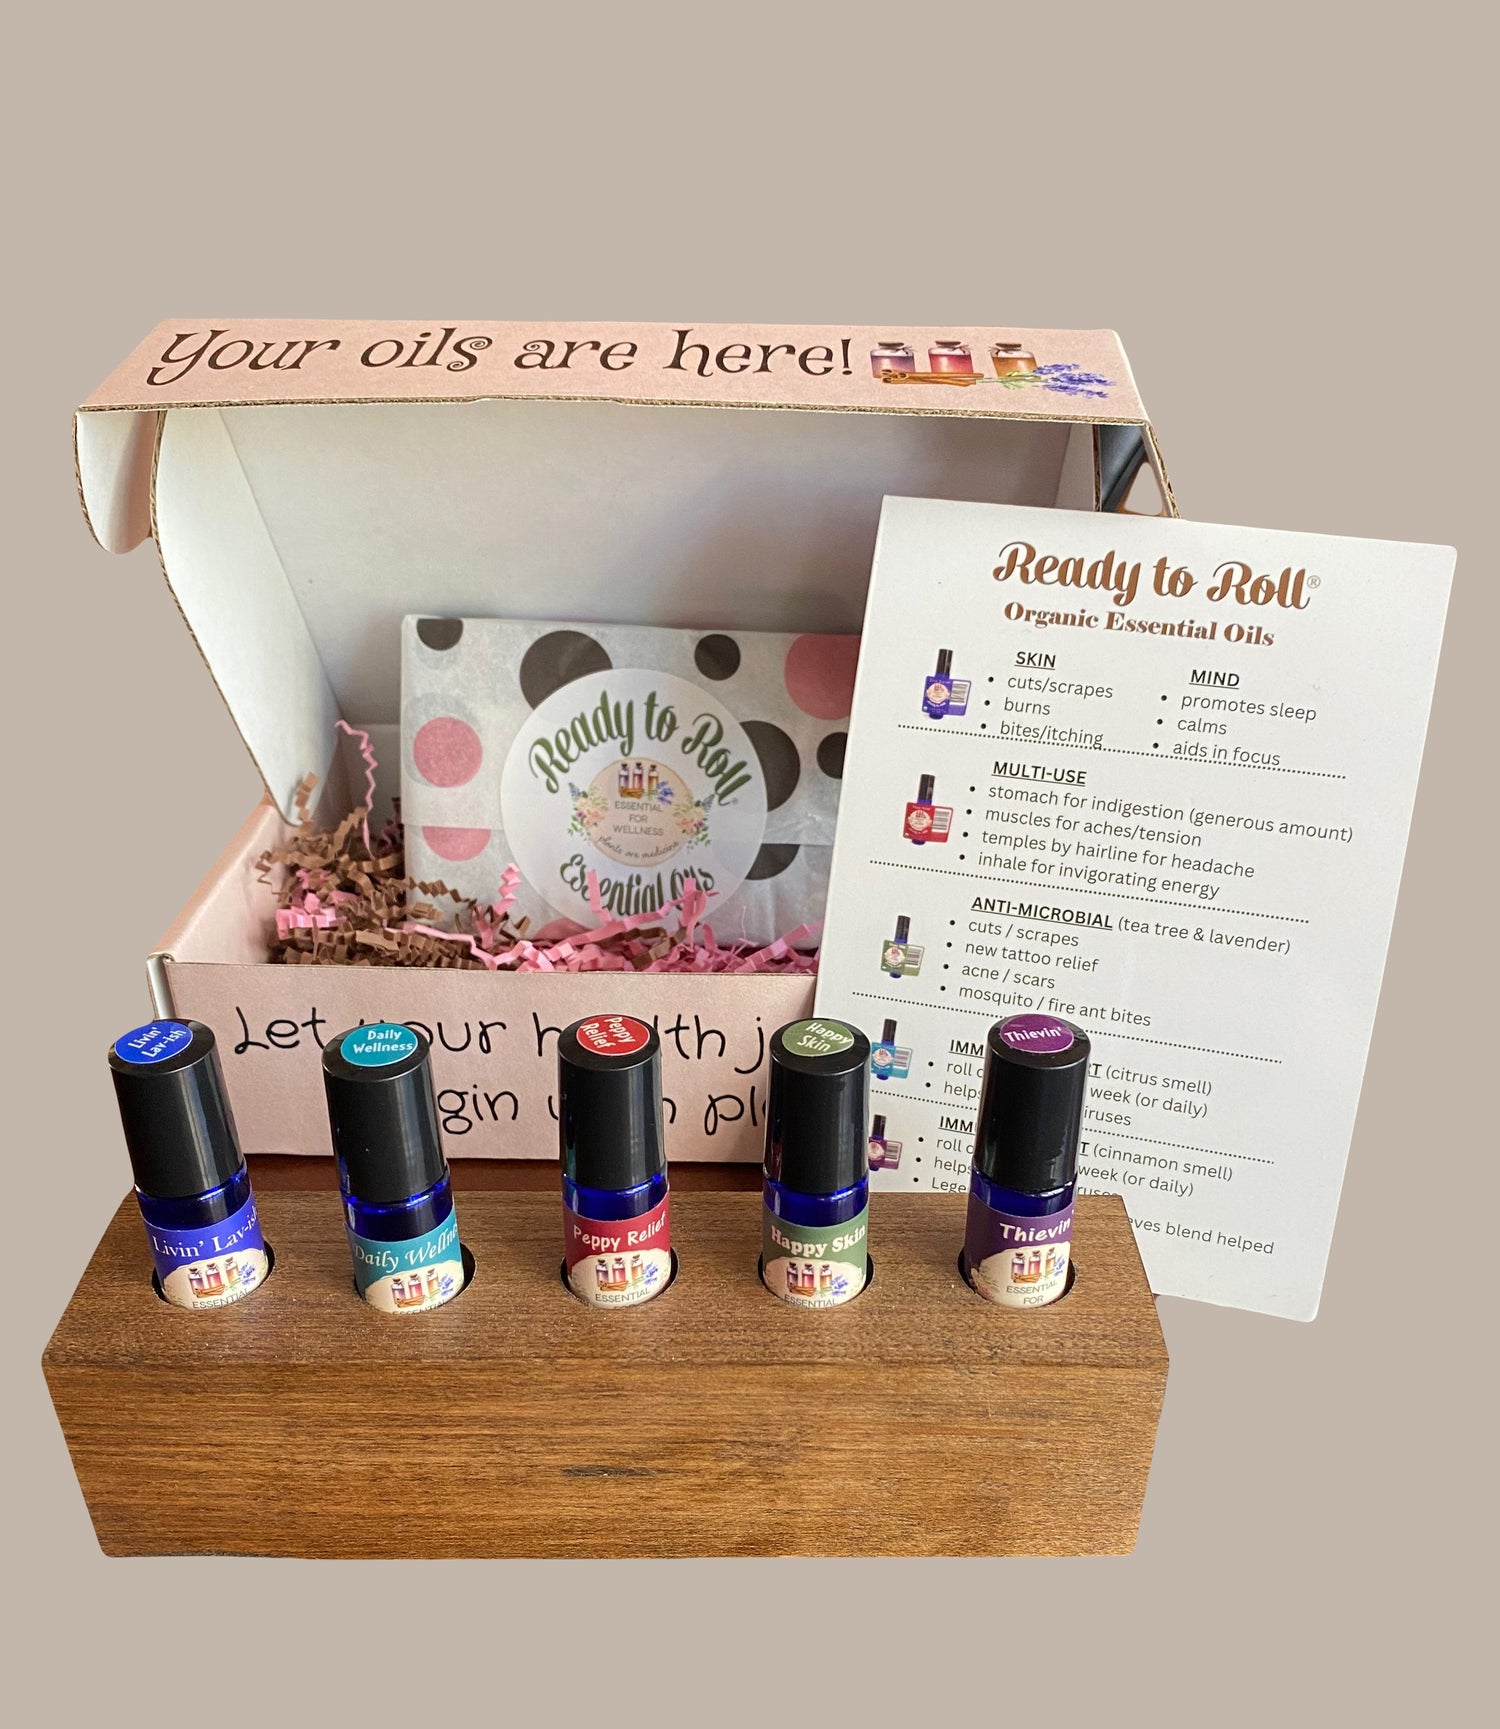 Five Ready to Roll Essential Oil Blends in a handmade wooden holder with how-to-use magnet and decorative gift box